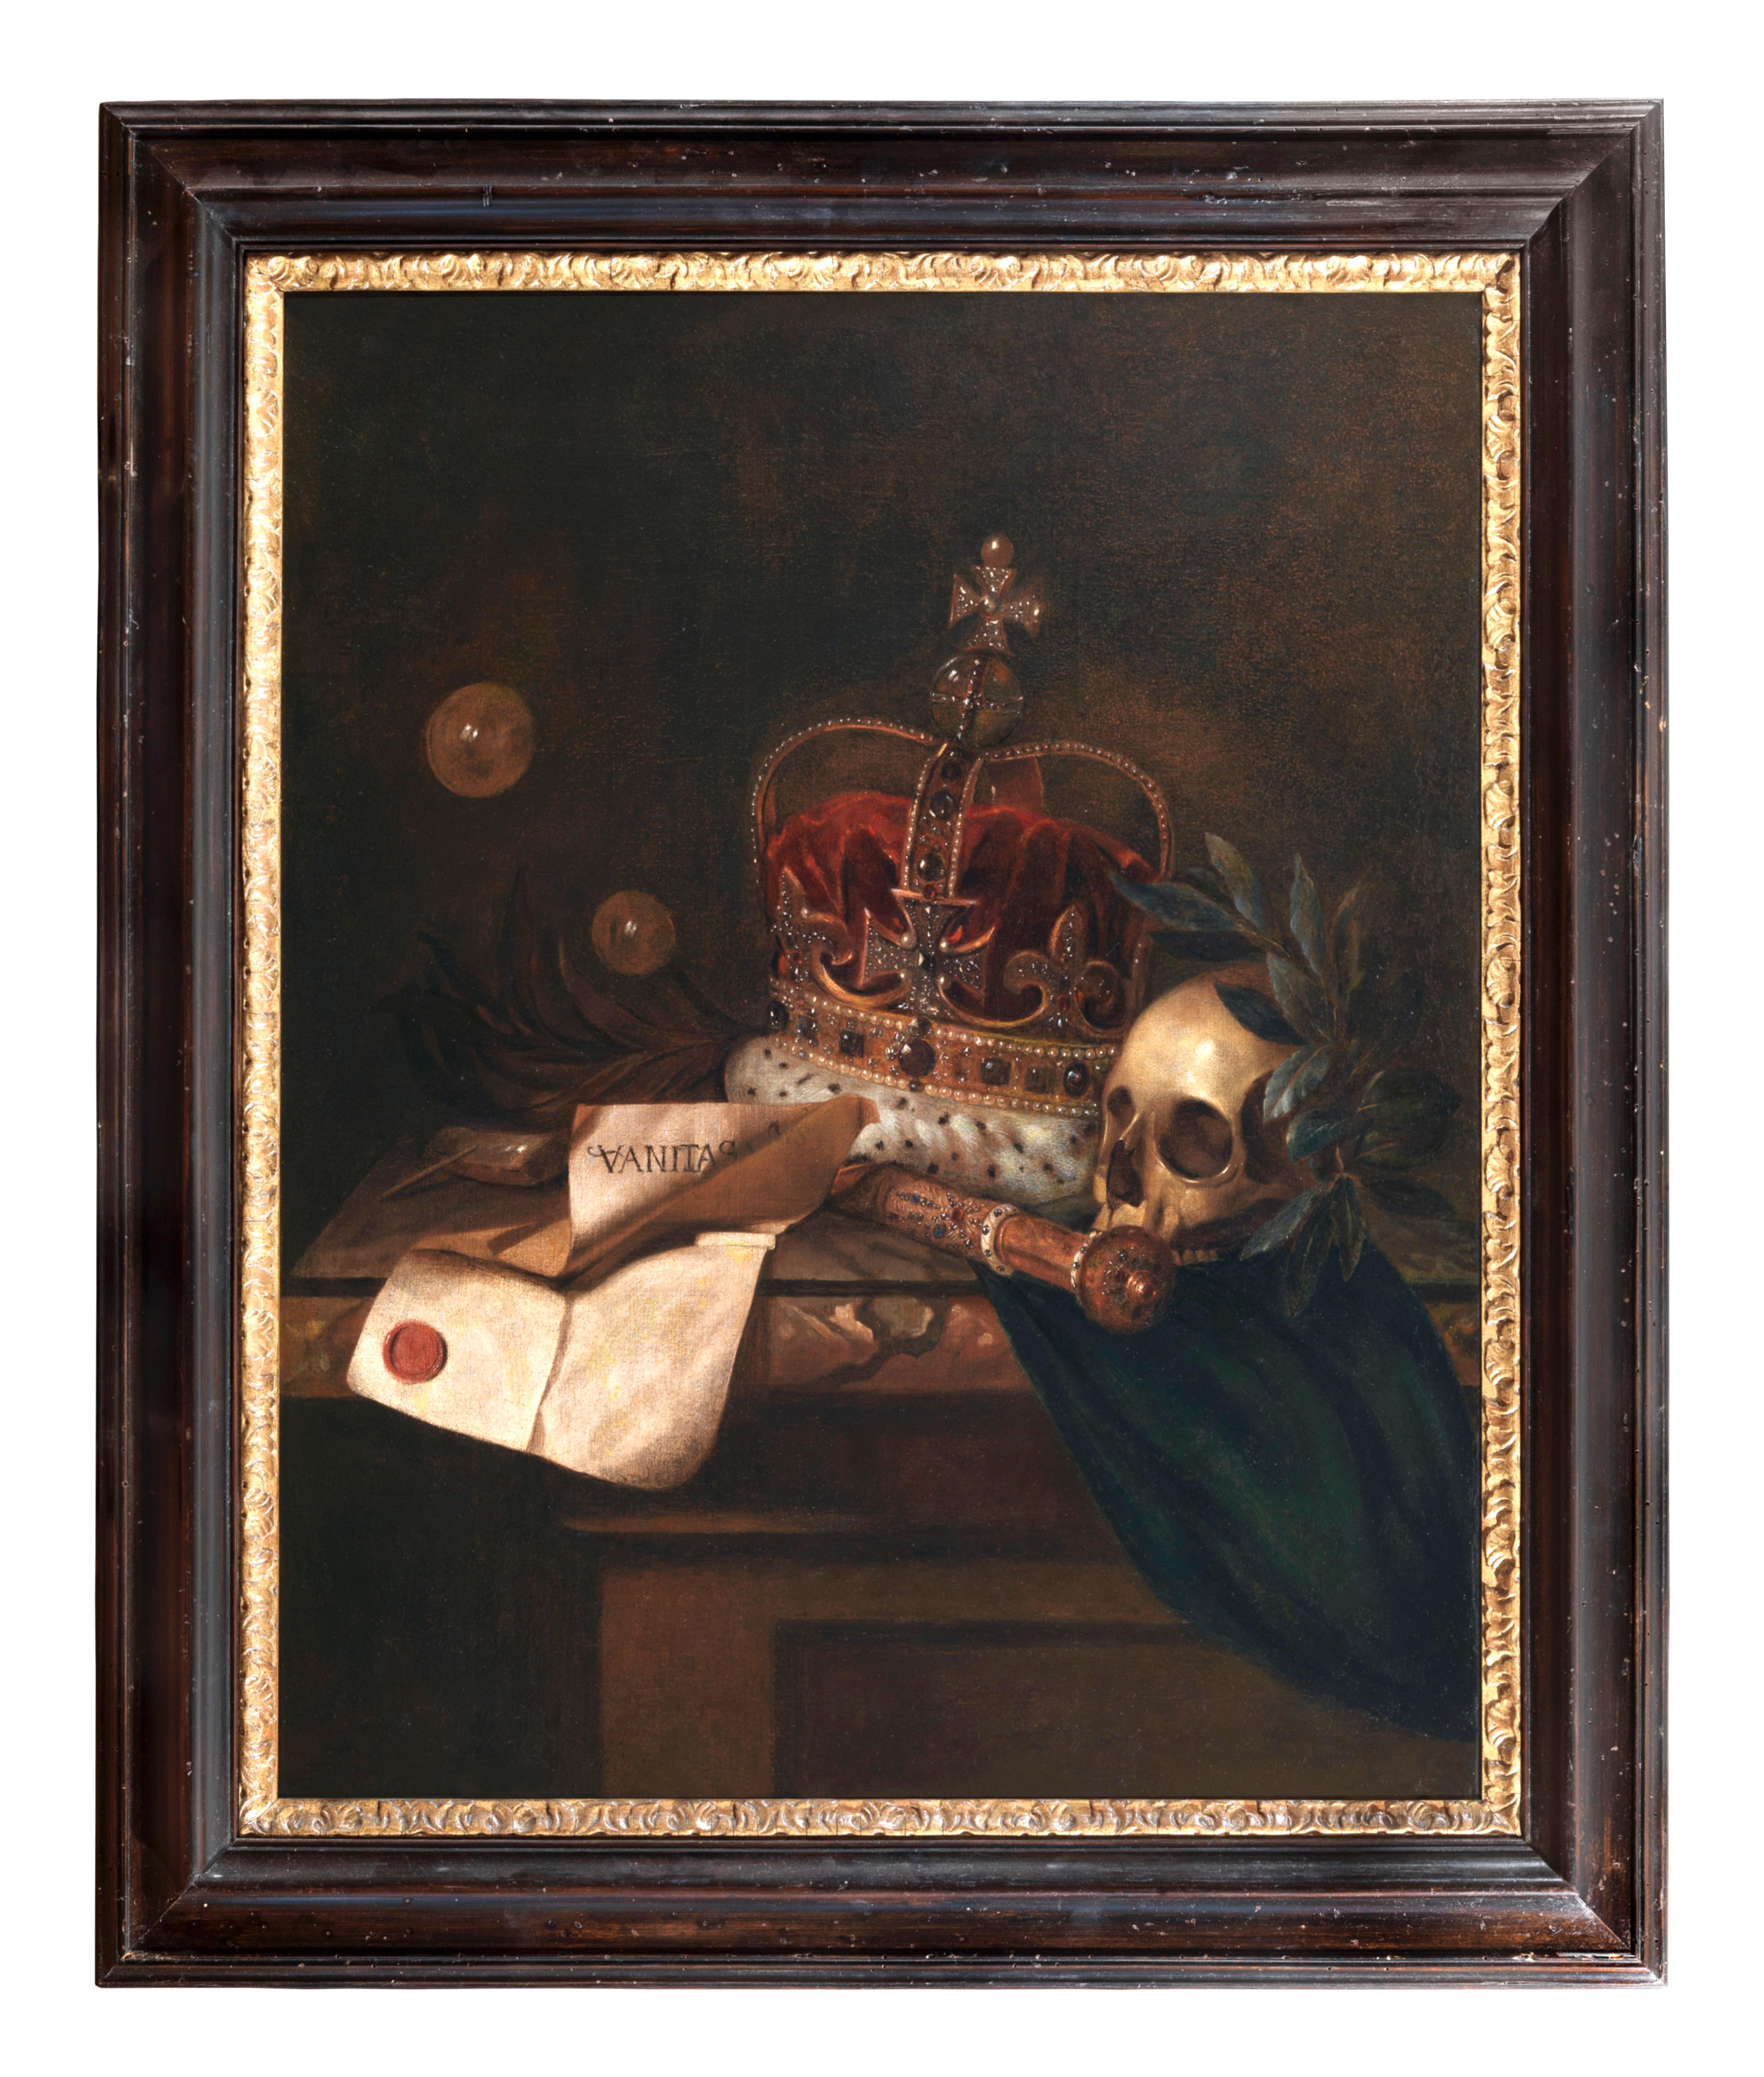 Edward Collier  Figurative Painting - VANITAS  Oil on Canvas by Edward Collier